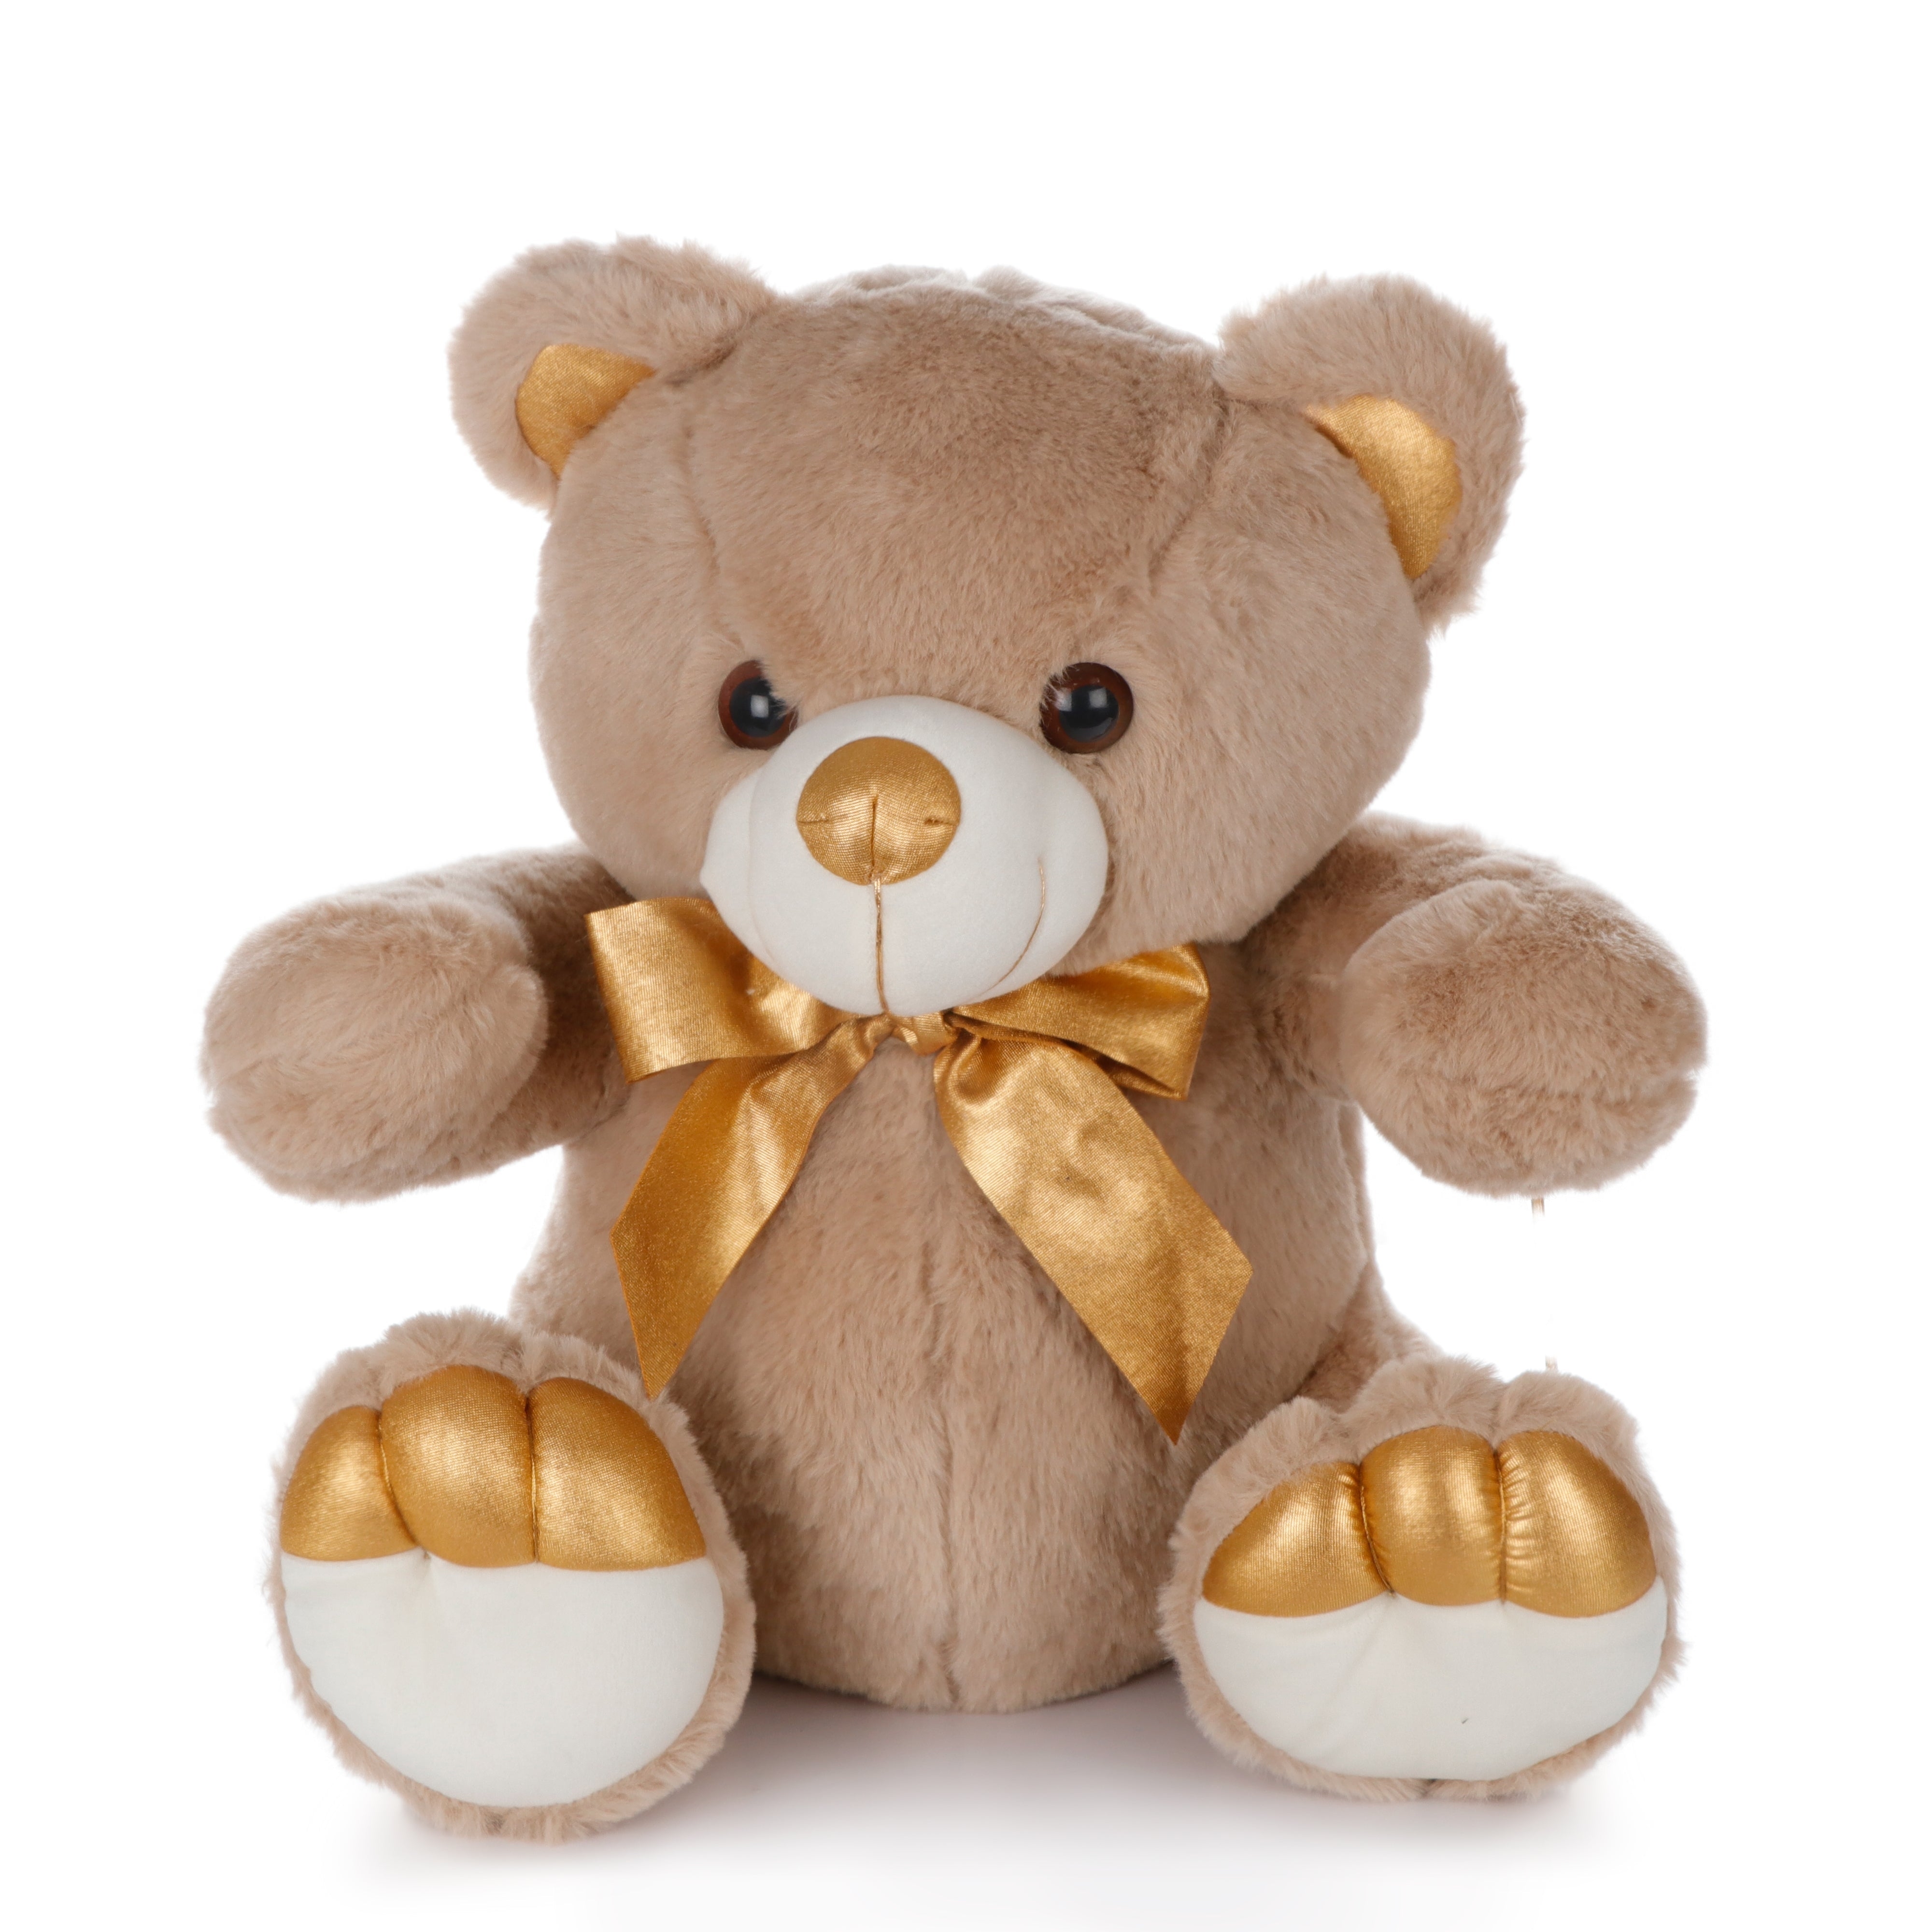 Archies | Archies Soft Toys, Teddy Bear For Girls, Soft Toys Boyfriend, Husband For Kids, Birthday Gift For Girls,Wife,   Brown Teddy Bear with Golden Paws - 40CM